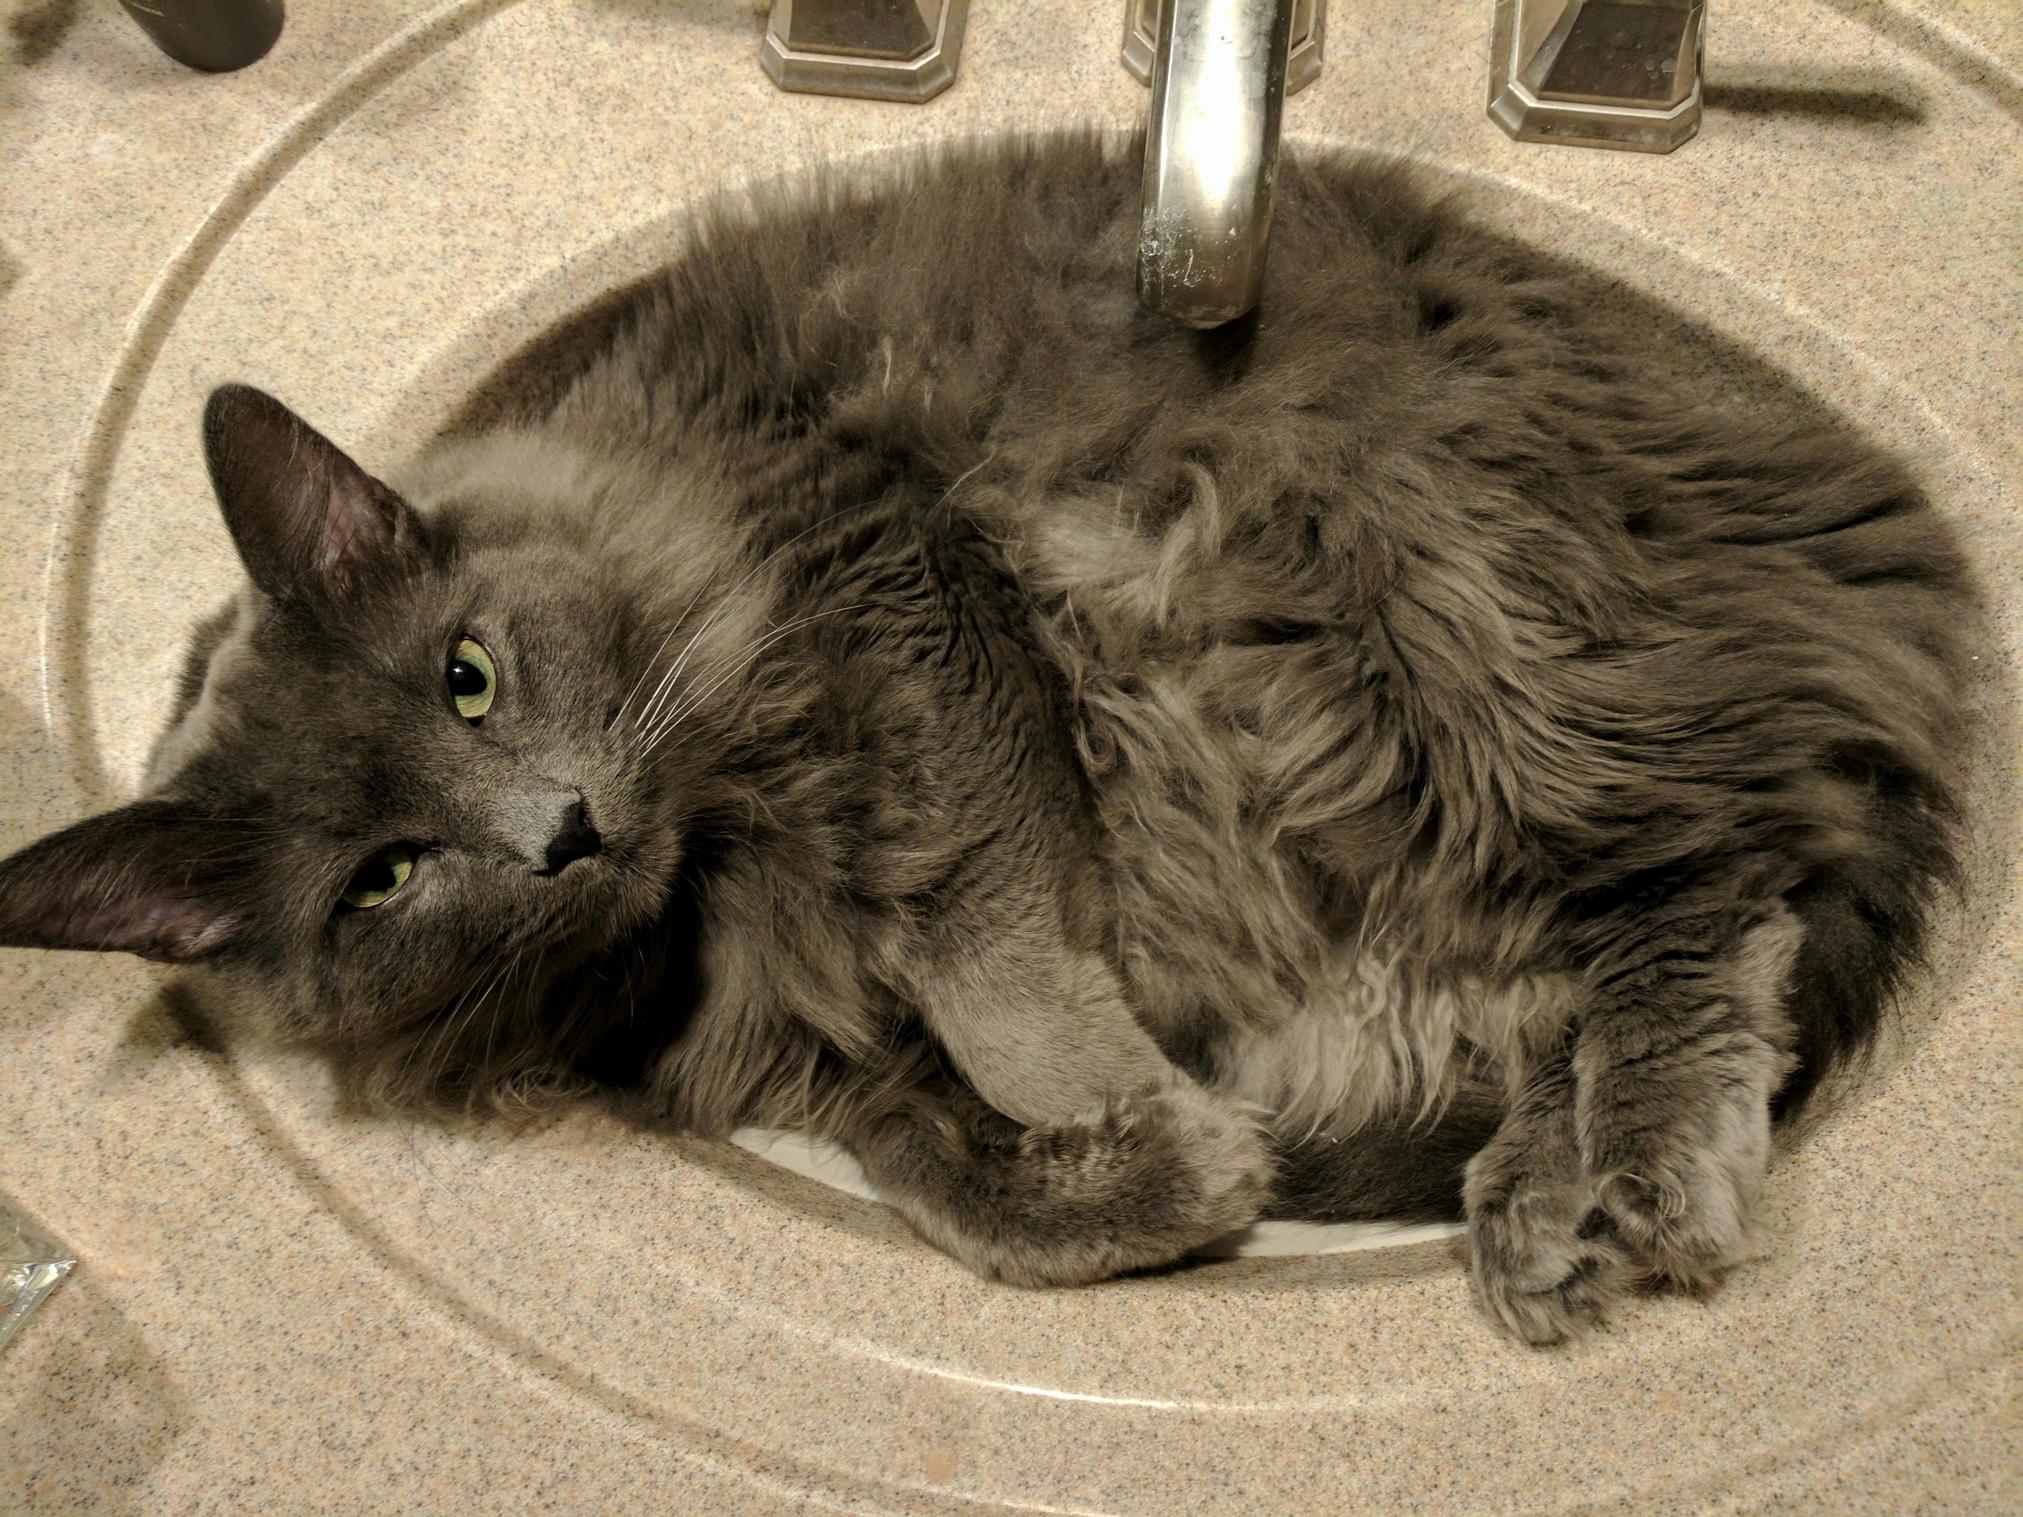 This is benny hes always taking up the sink.